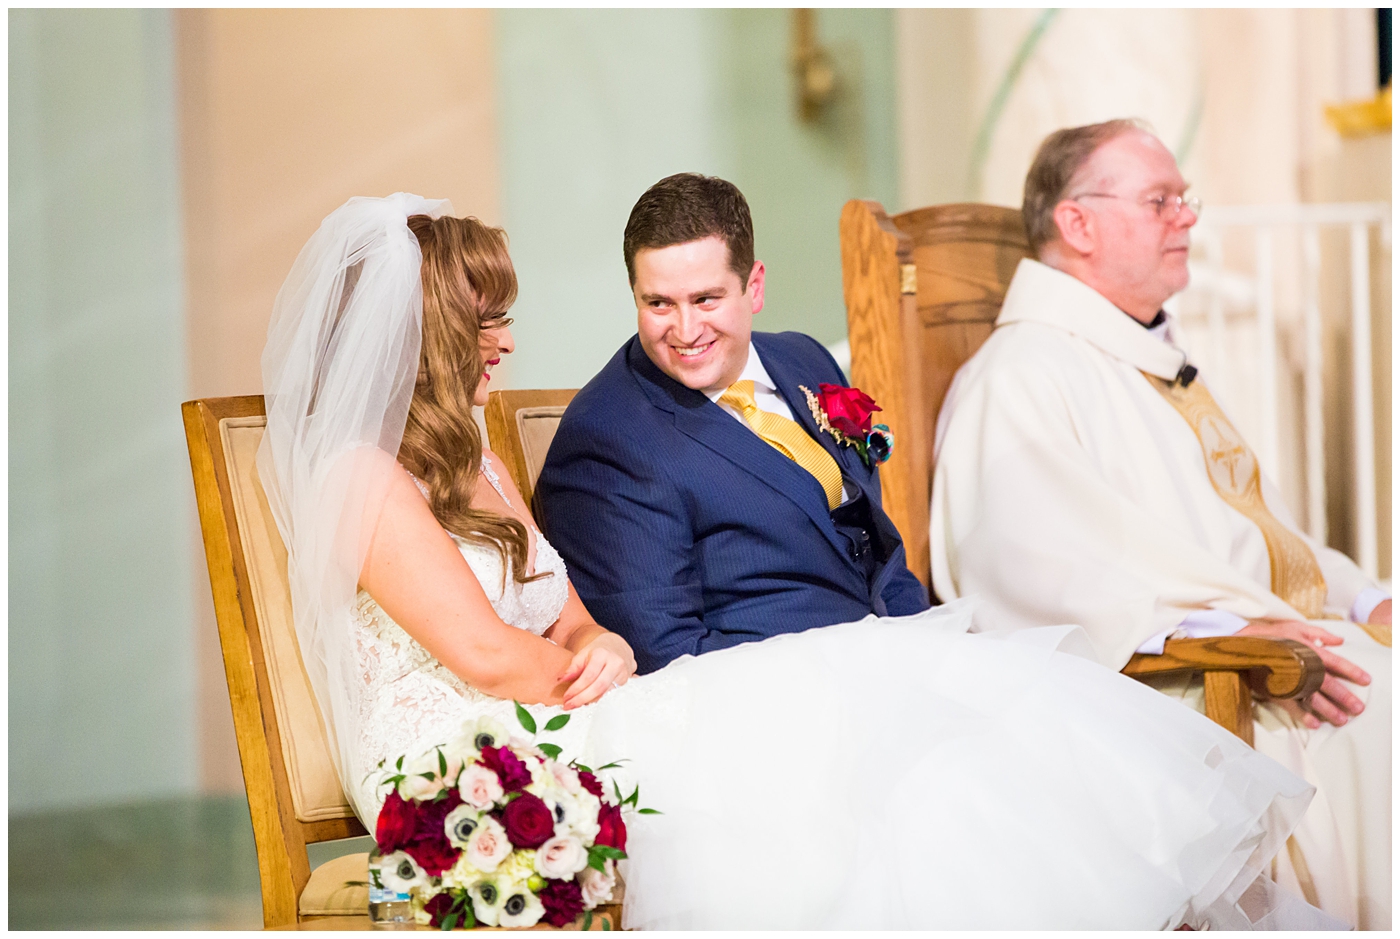 groom in blue suit with yellow tie and red rose boutonniere and bride in morilee wedding dress with red and white rose bouquet during ceremony